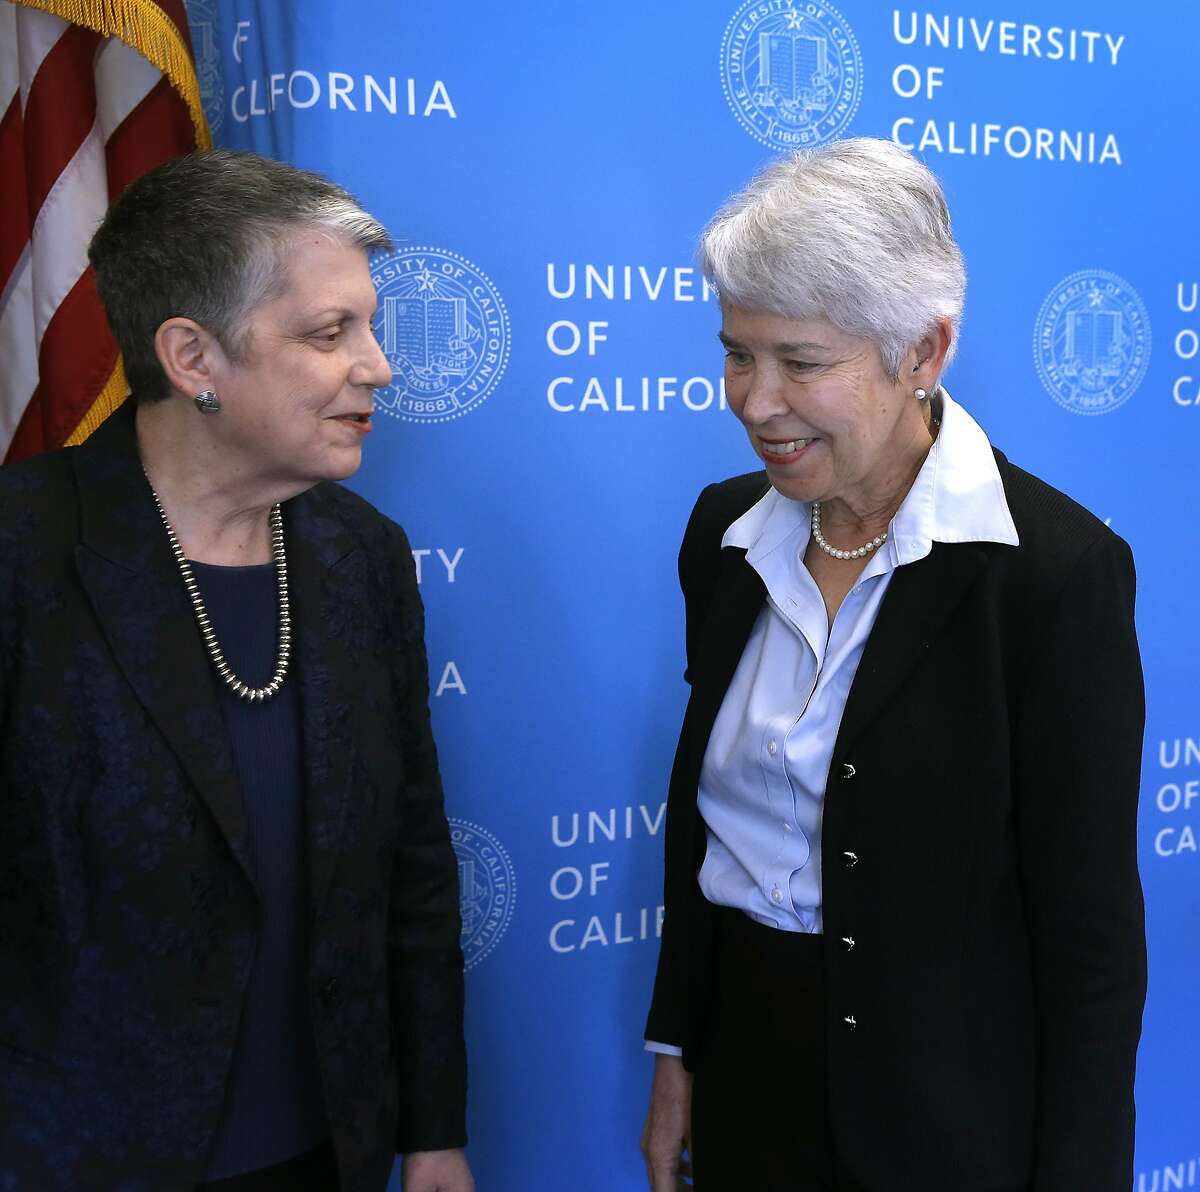 University of California president Janel Napolitano speaks with Carol Christ after she is confirmed as the new chancellor of UC Berkeley by the Board of Regents in San Francisco, Calif. on Thursday, March 16, 2017. Christ succeeds Nicholas Dirks who is stepping down at the end of the current school year.